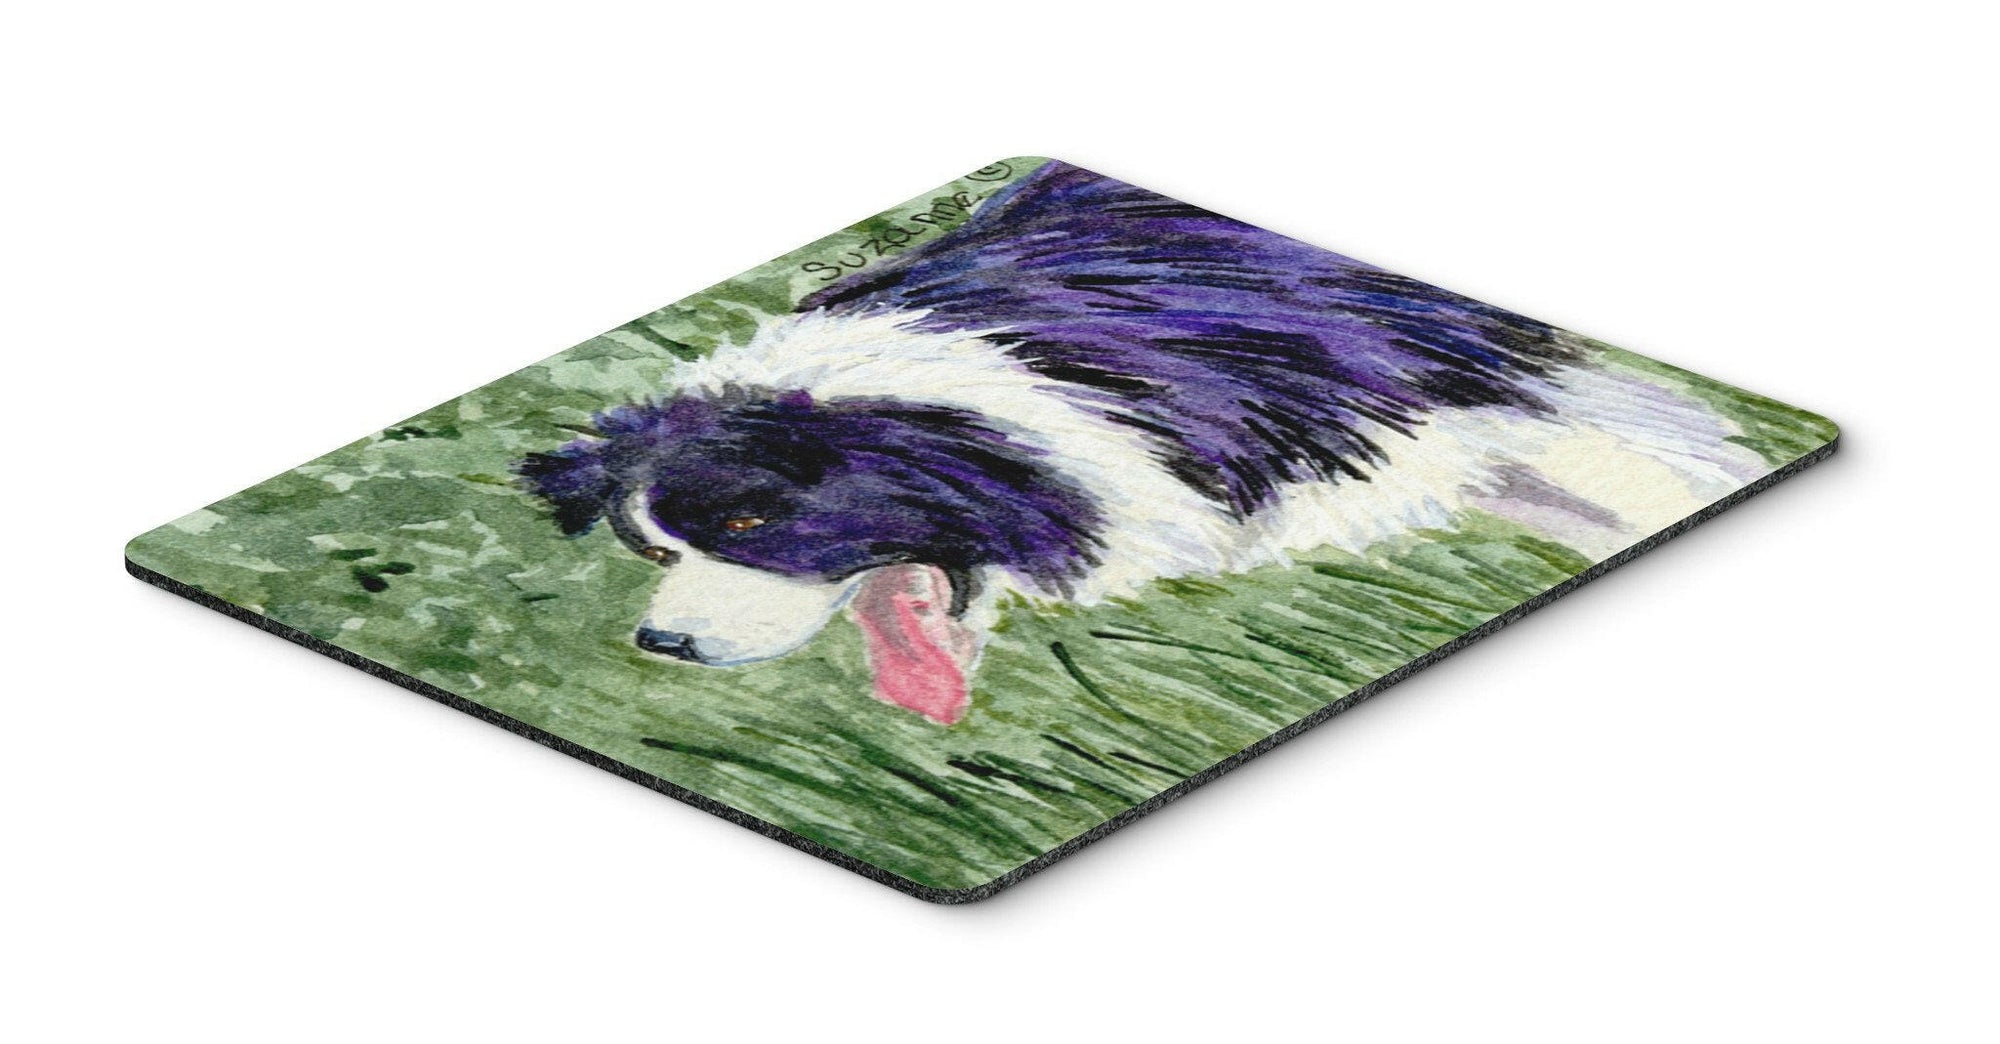 Border Collie Mouse pad, hot pad, or trivet by Caroline's Treasures